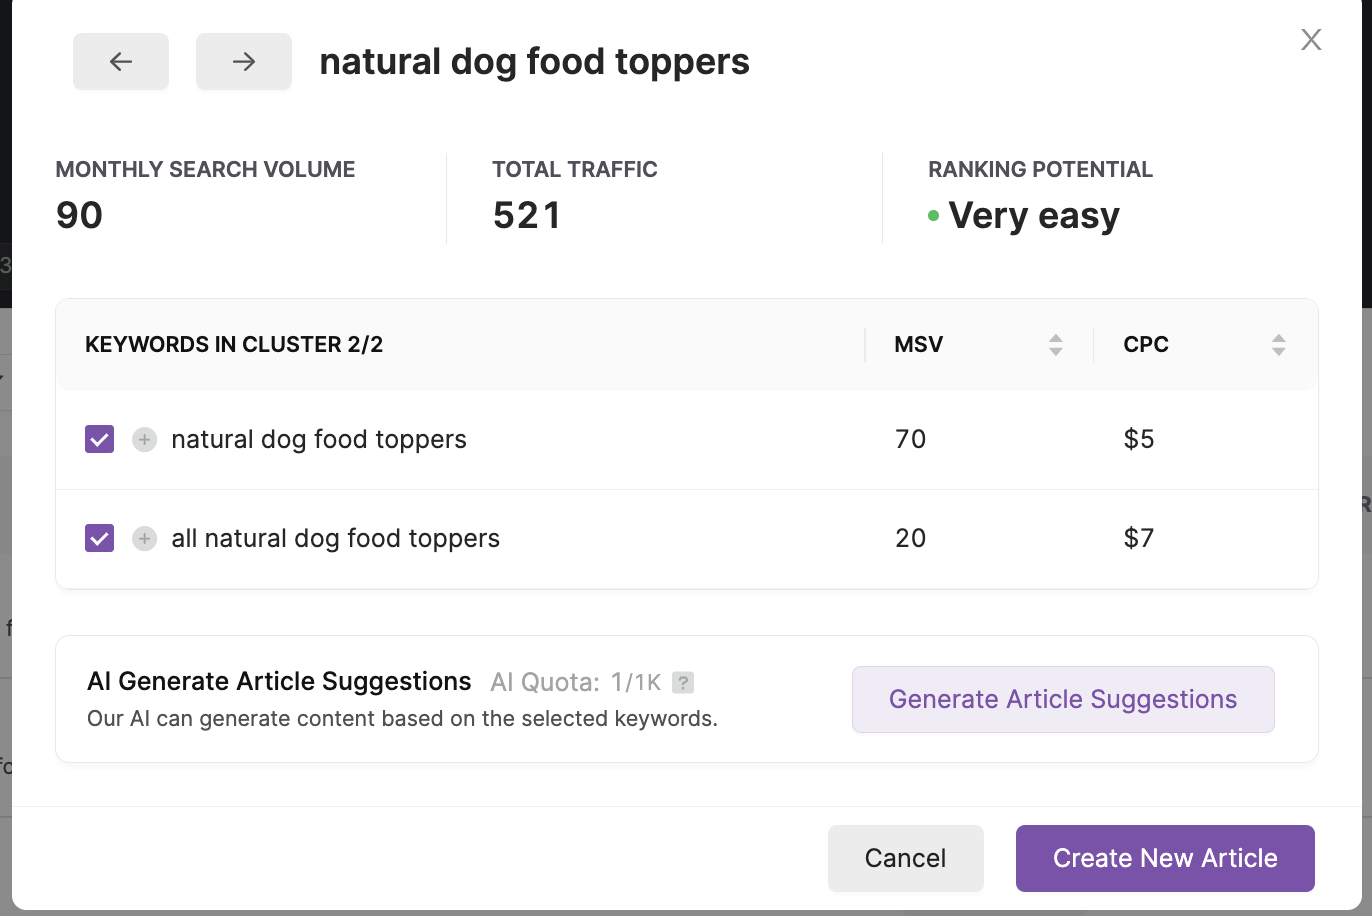 Screenshot of a keyword research tool analyzing the search potential for "natural dog food toppings," displaying monthly search volume, total traffic potential, and keyword difficulty ranking, with options to generate article suggestions for a content